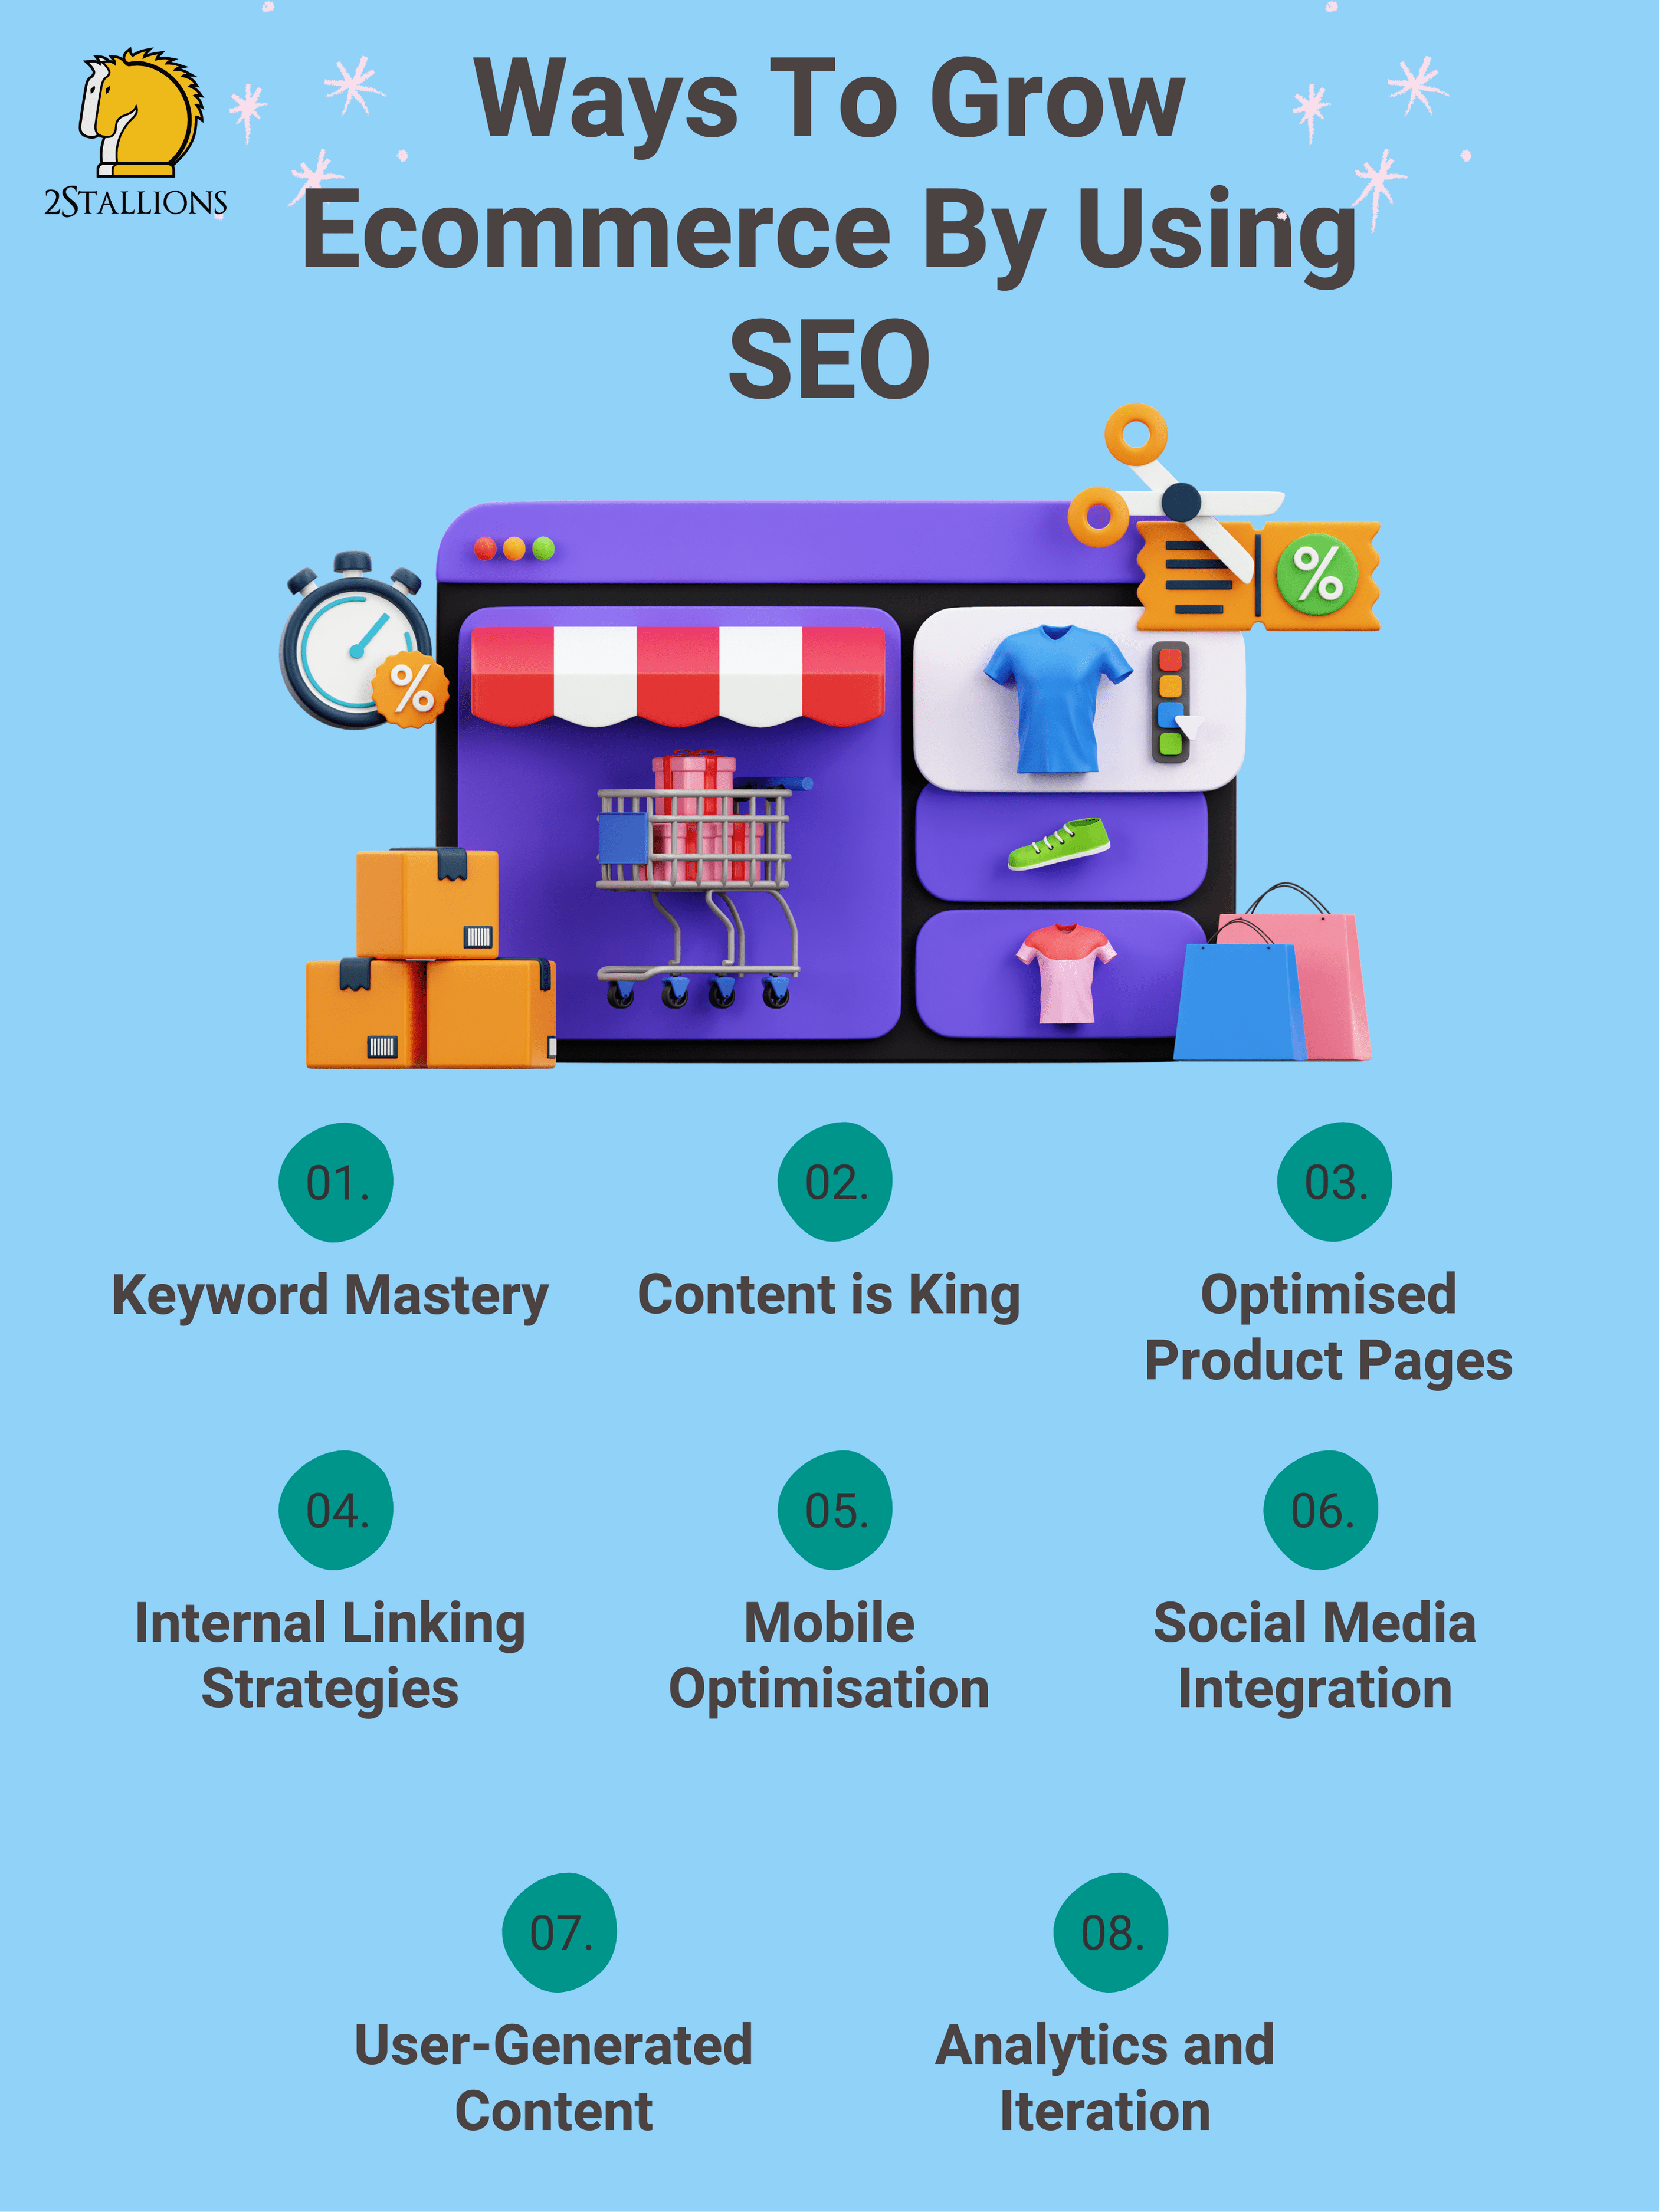 Ways To Grow Ecommerce By Using SEO | 2Stallions